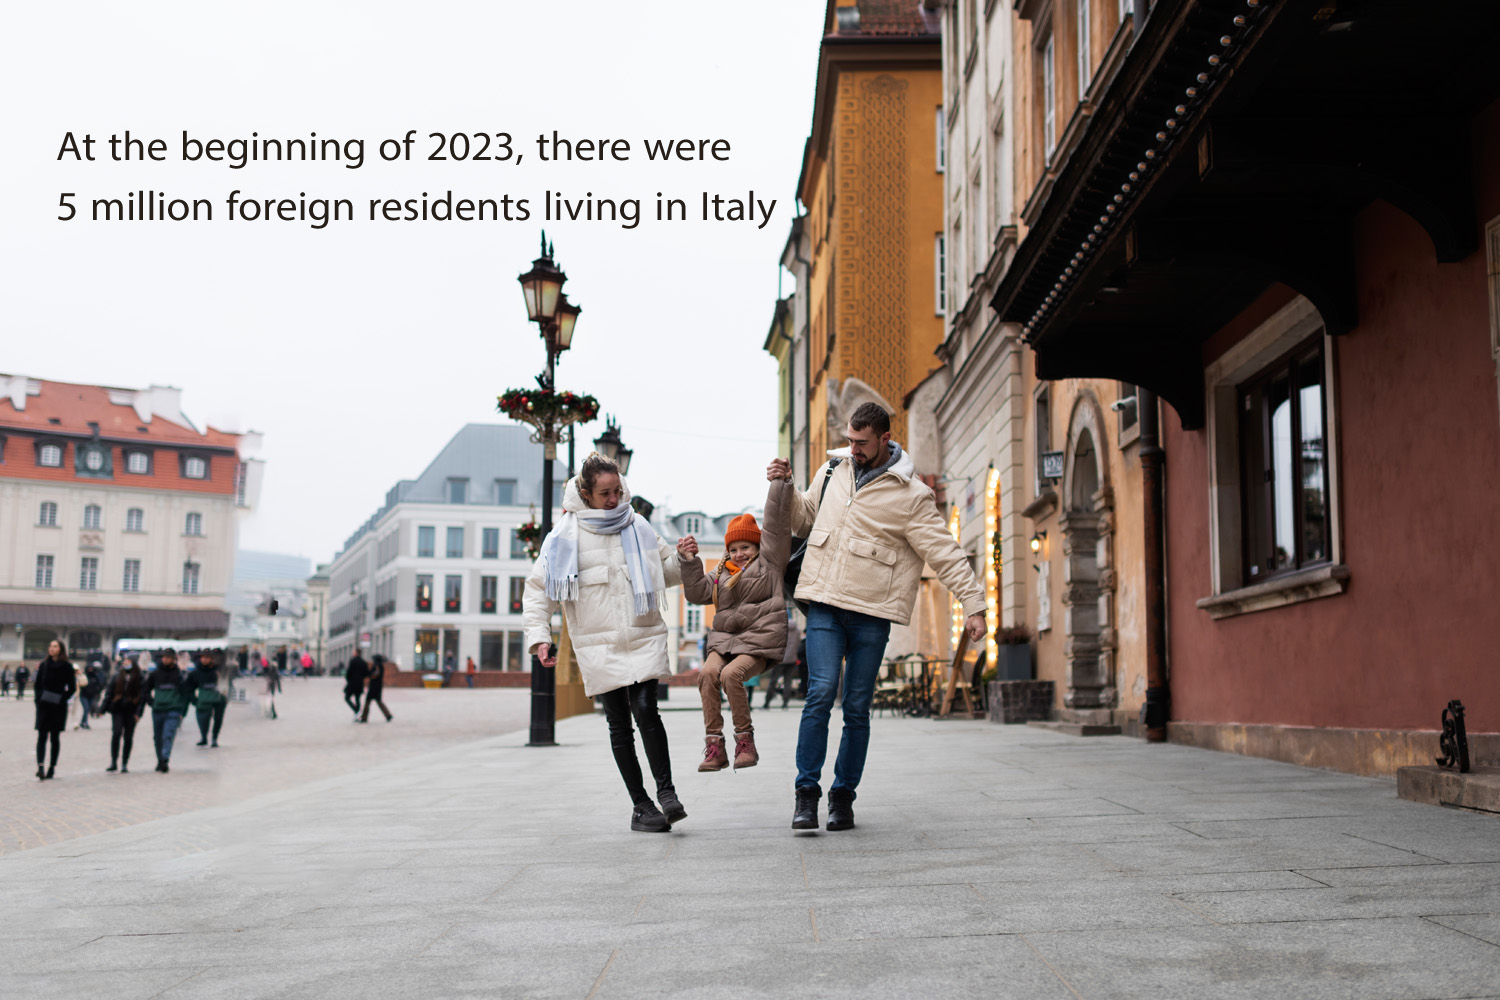 At the beginning of 2023, there were 5 million foreign residents living in Italy.